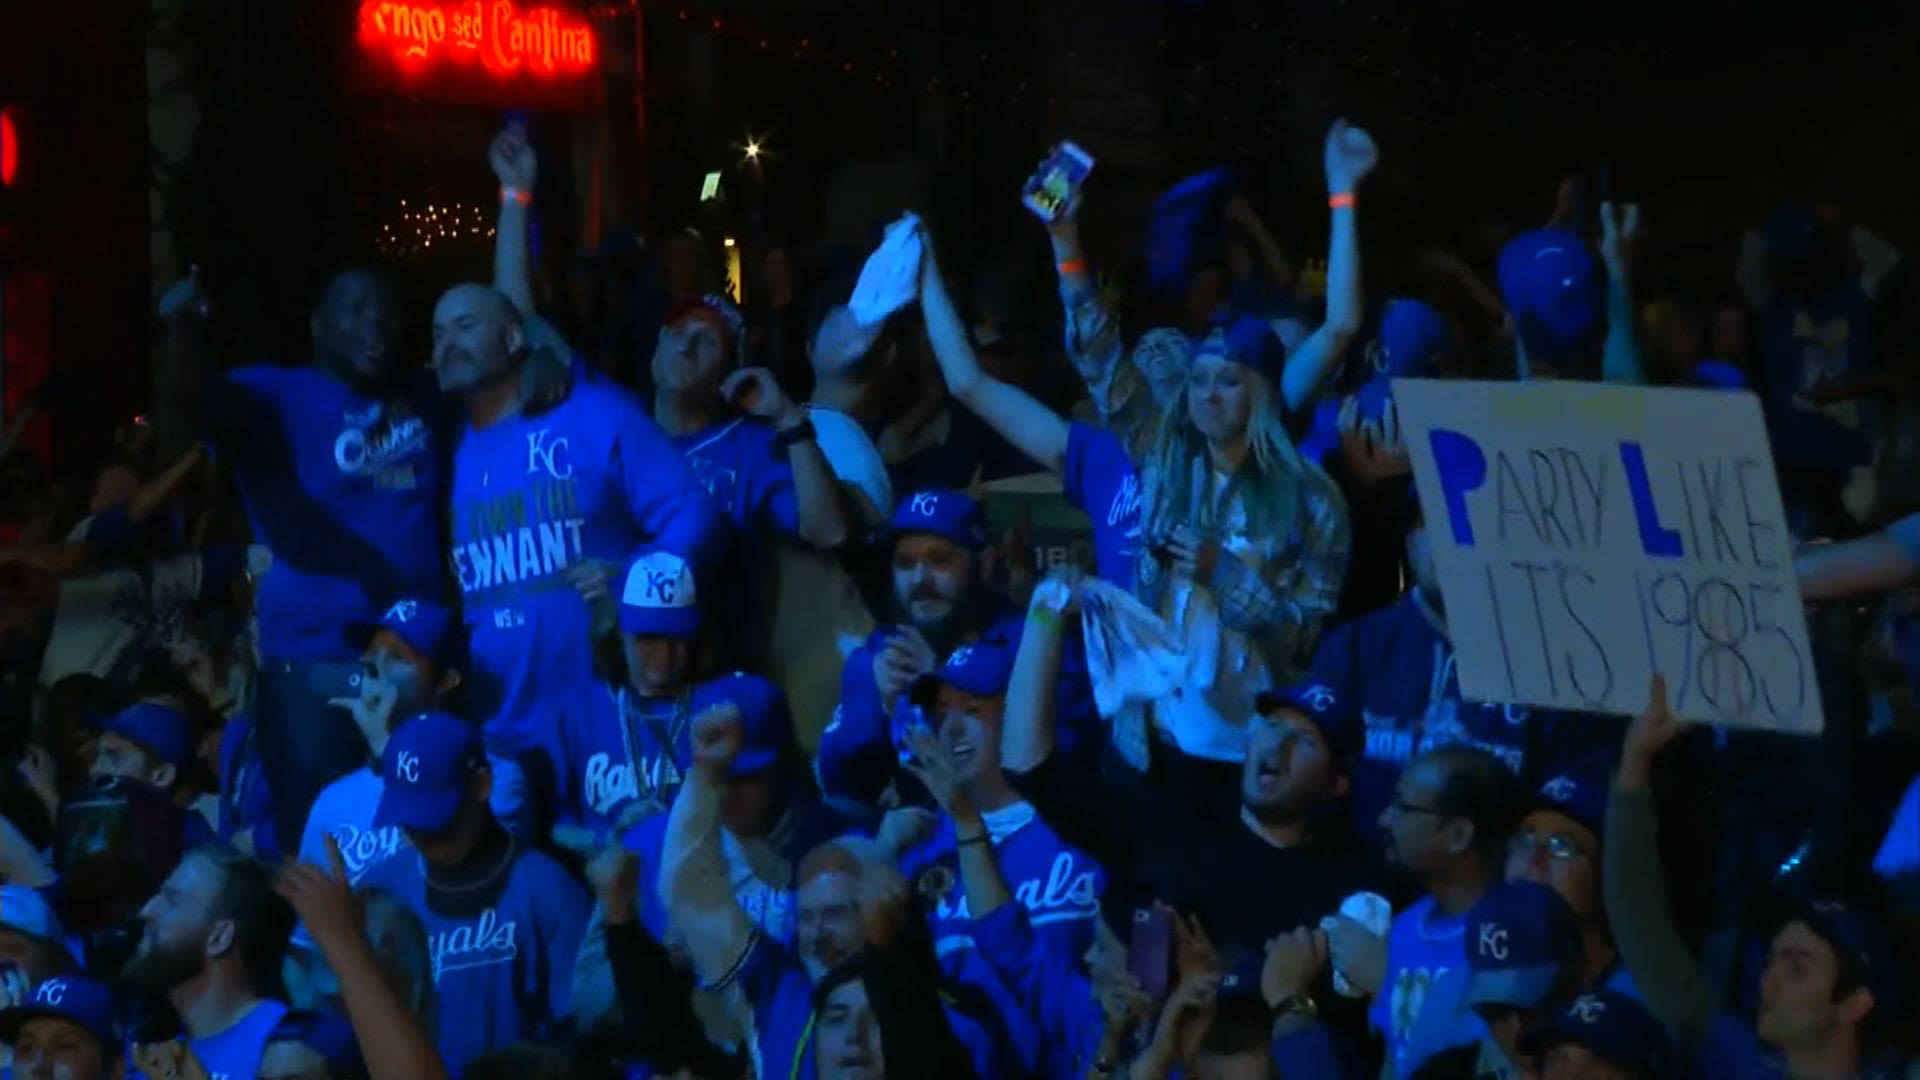 Here is the Kansas City Royals' World Series clinching win in six photos.